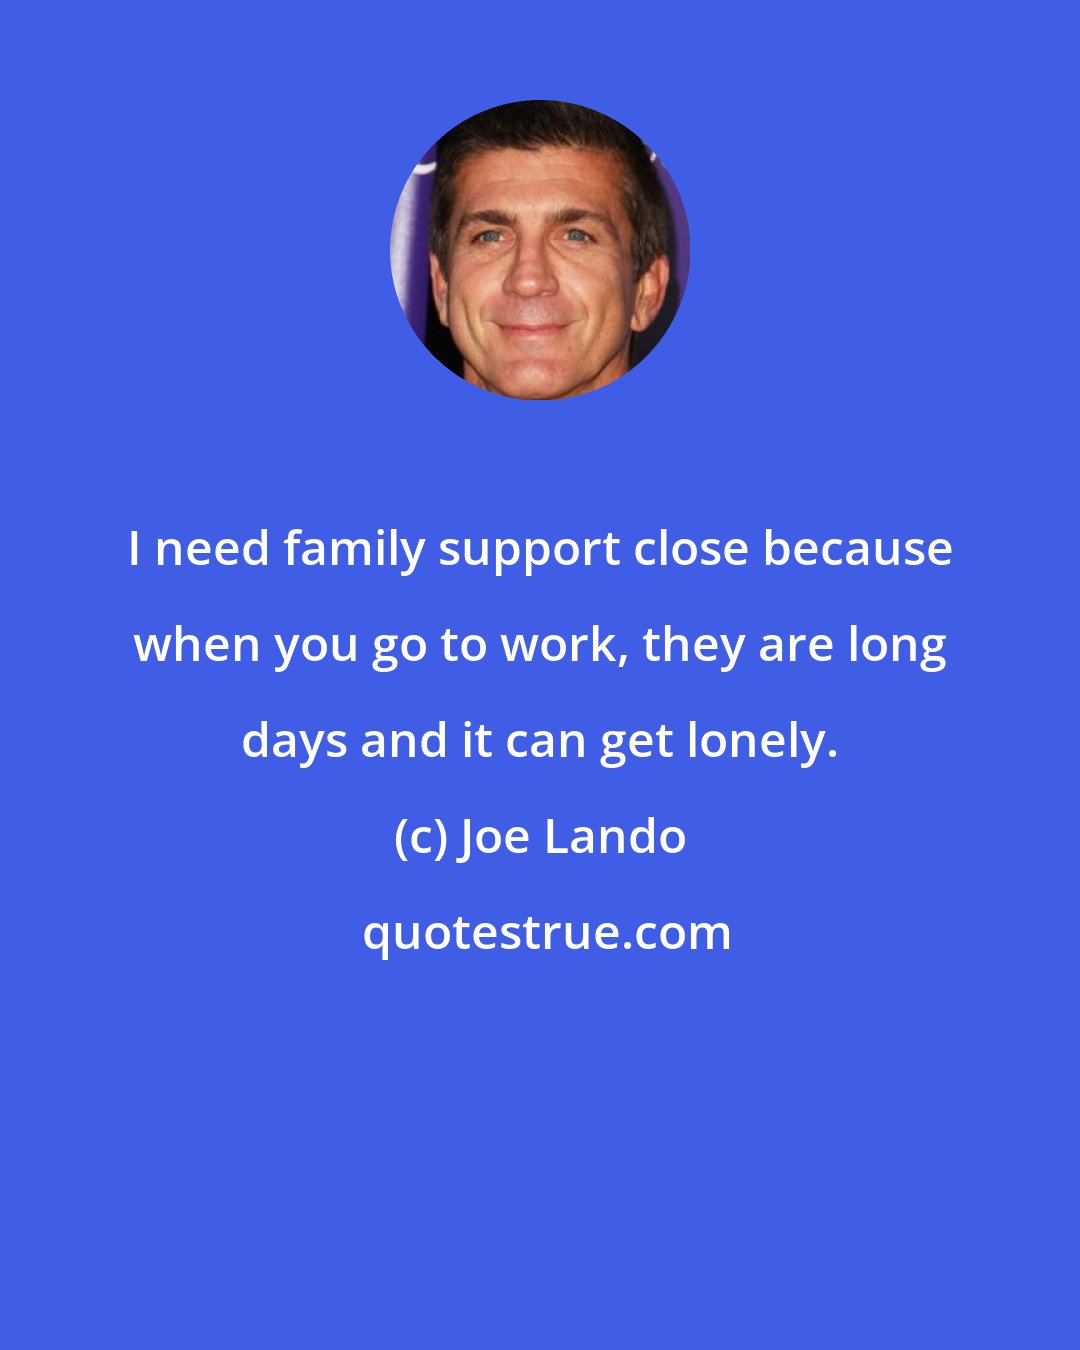 Joe Lando: I need family support close because when you go to work, they are long days and it can get lonely.